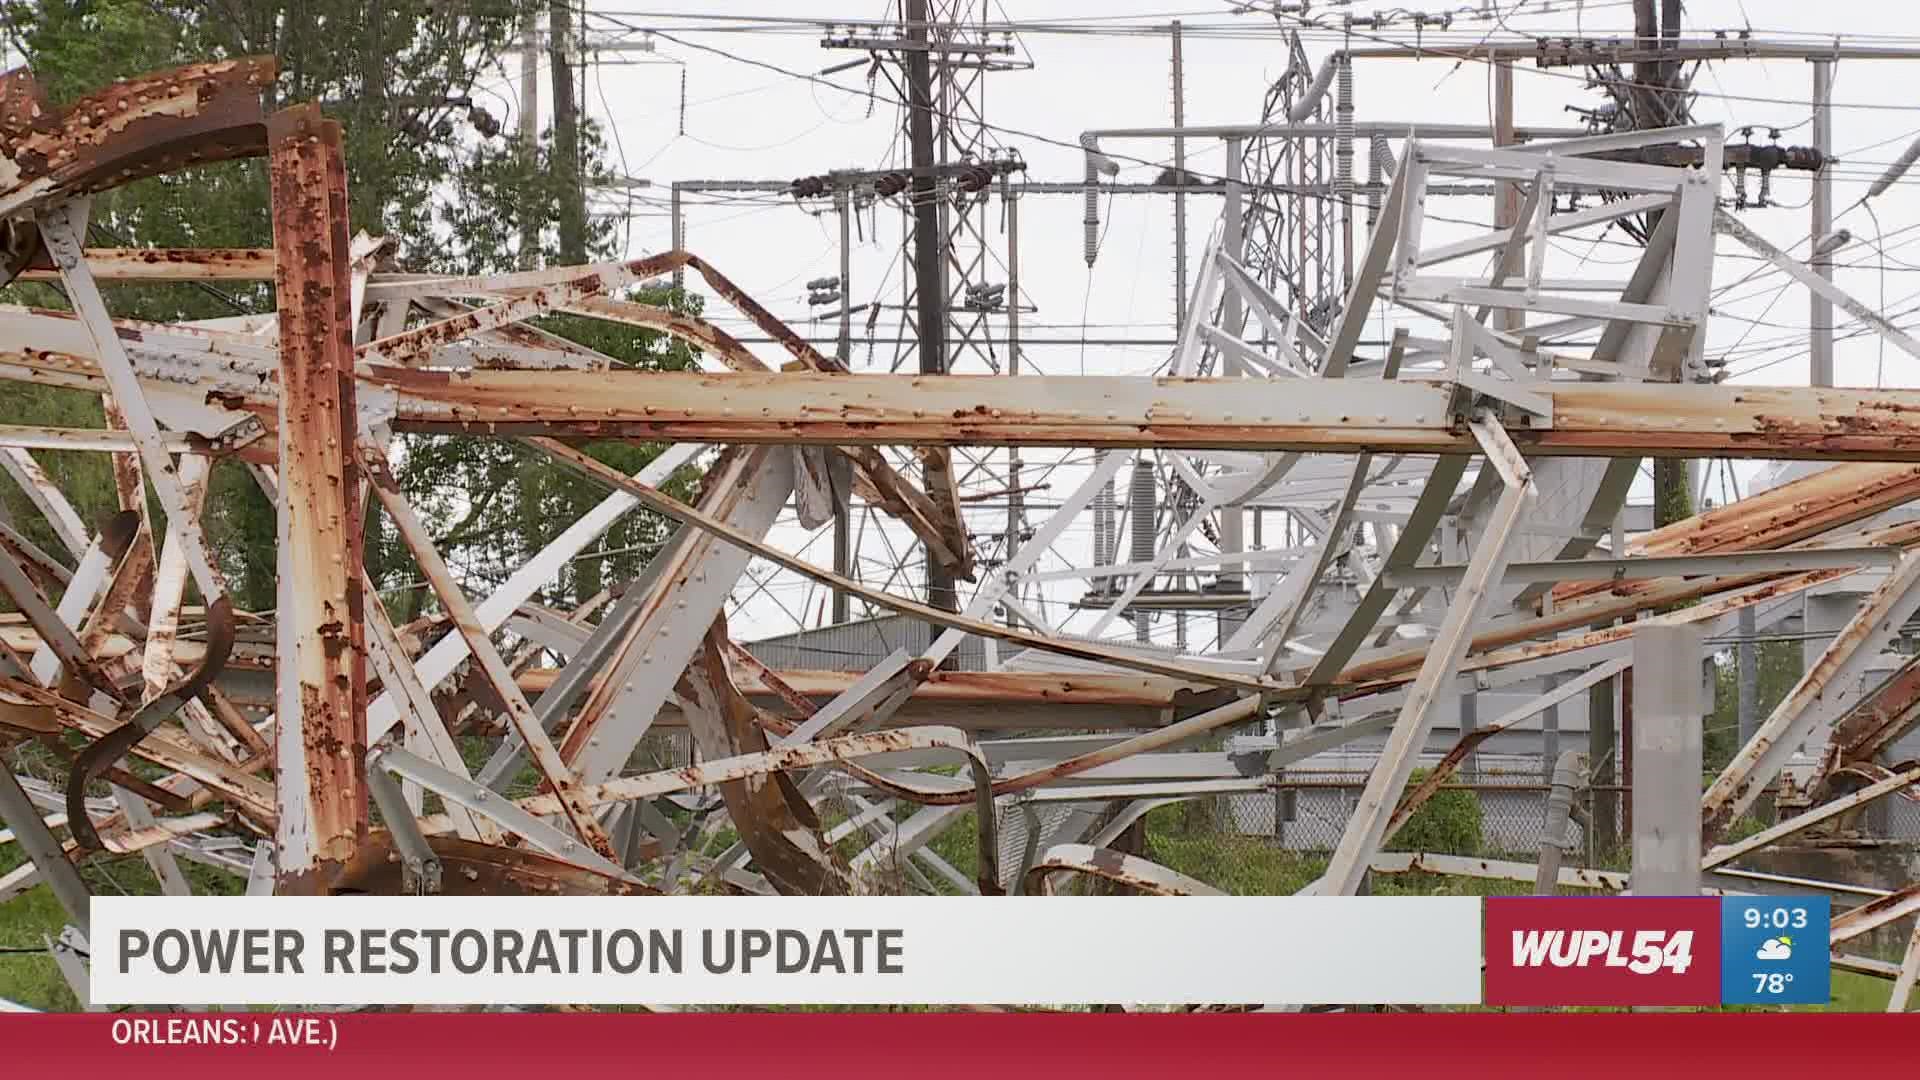 Entergy is providing new information about what it called "catastrophic transmission failure" that occurred during Ida.